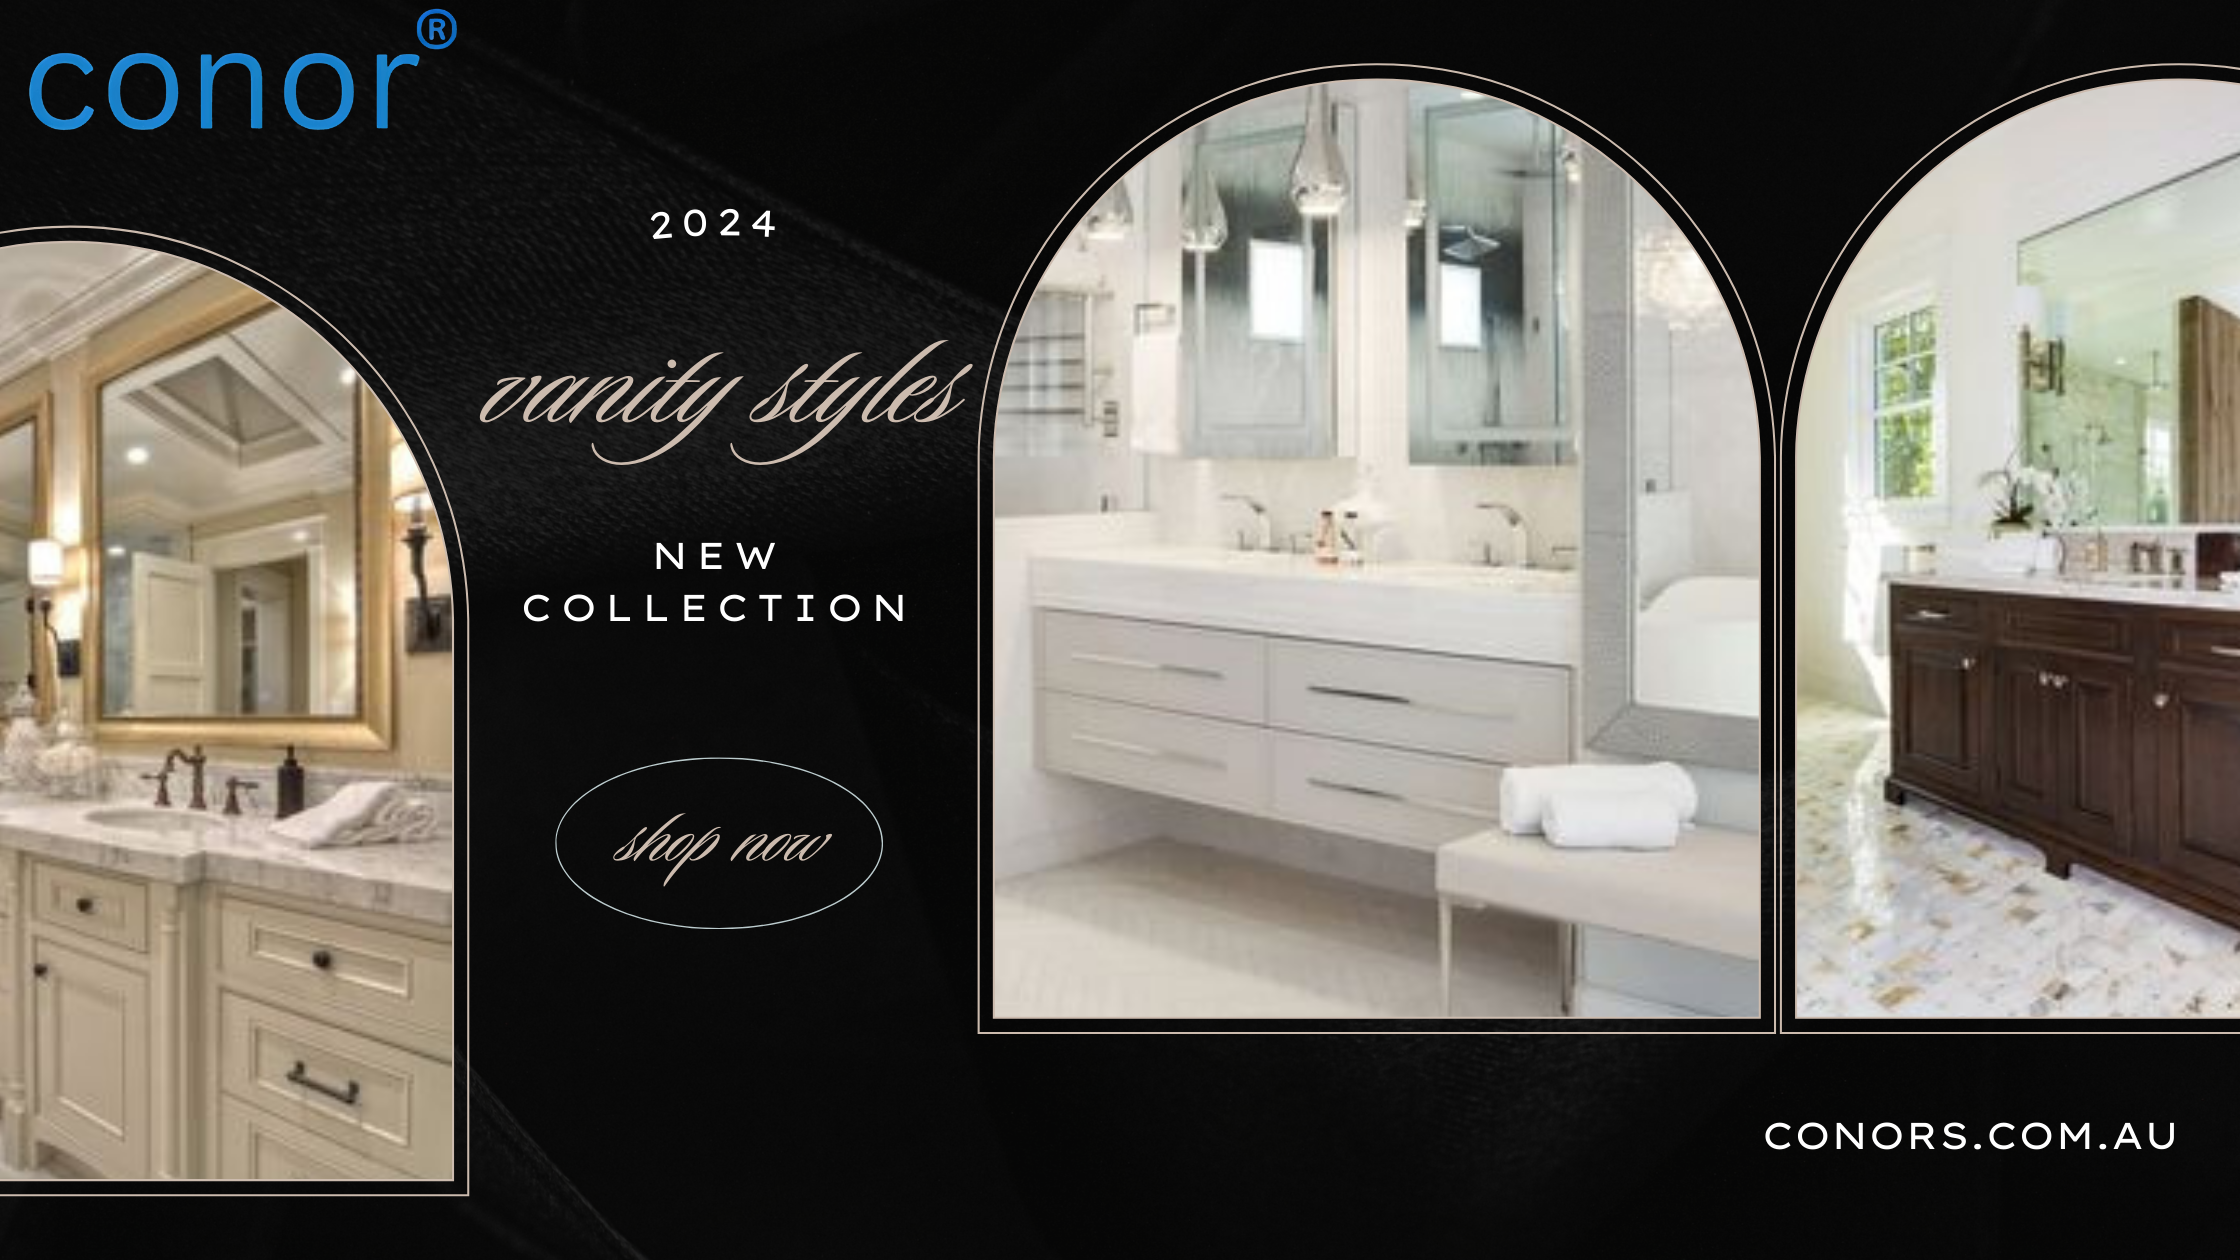 traditional, modern and transitional vanity styles